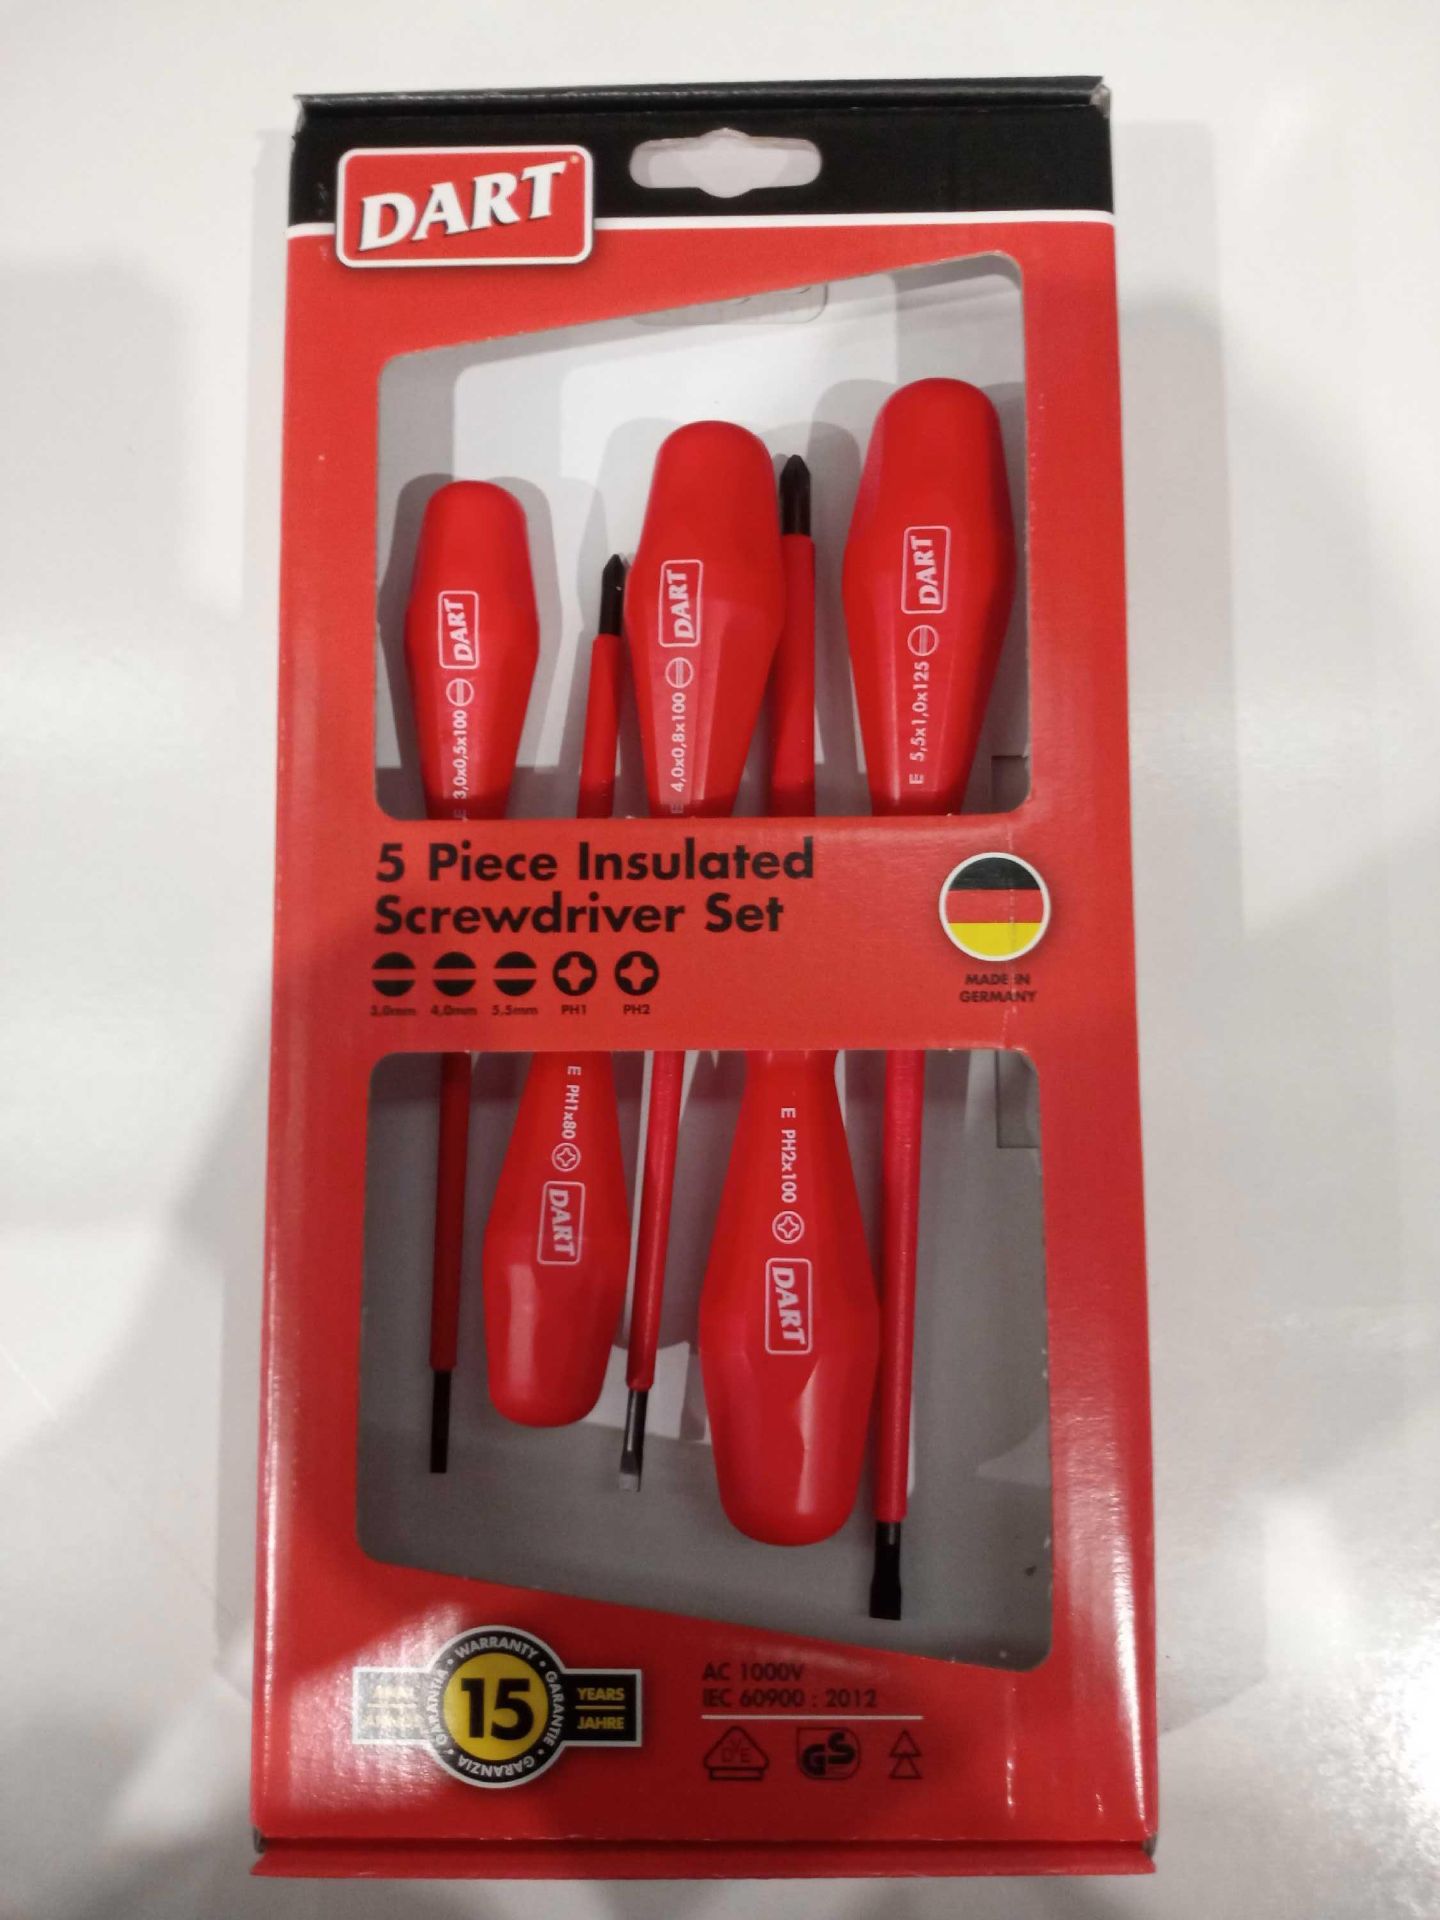 Insulated 5 piece screwdriver set - Image 2 of 2